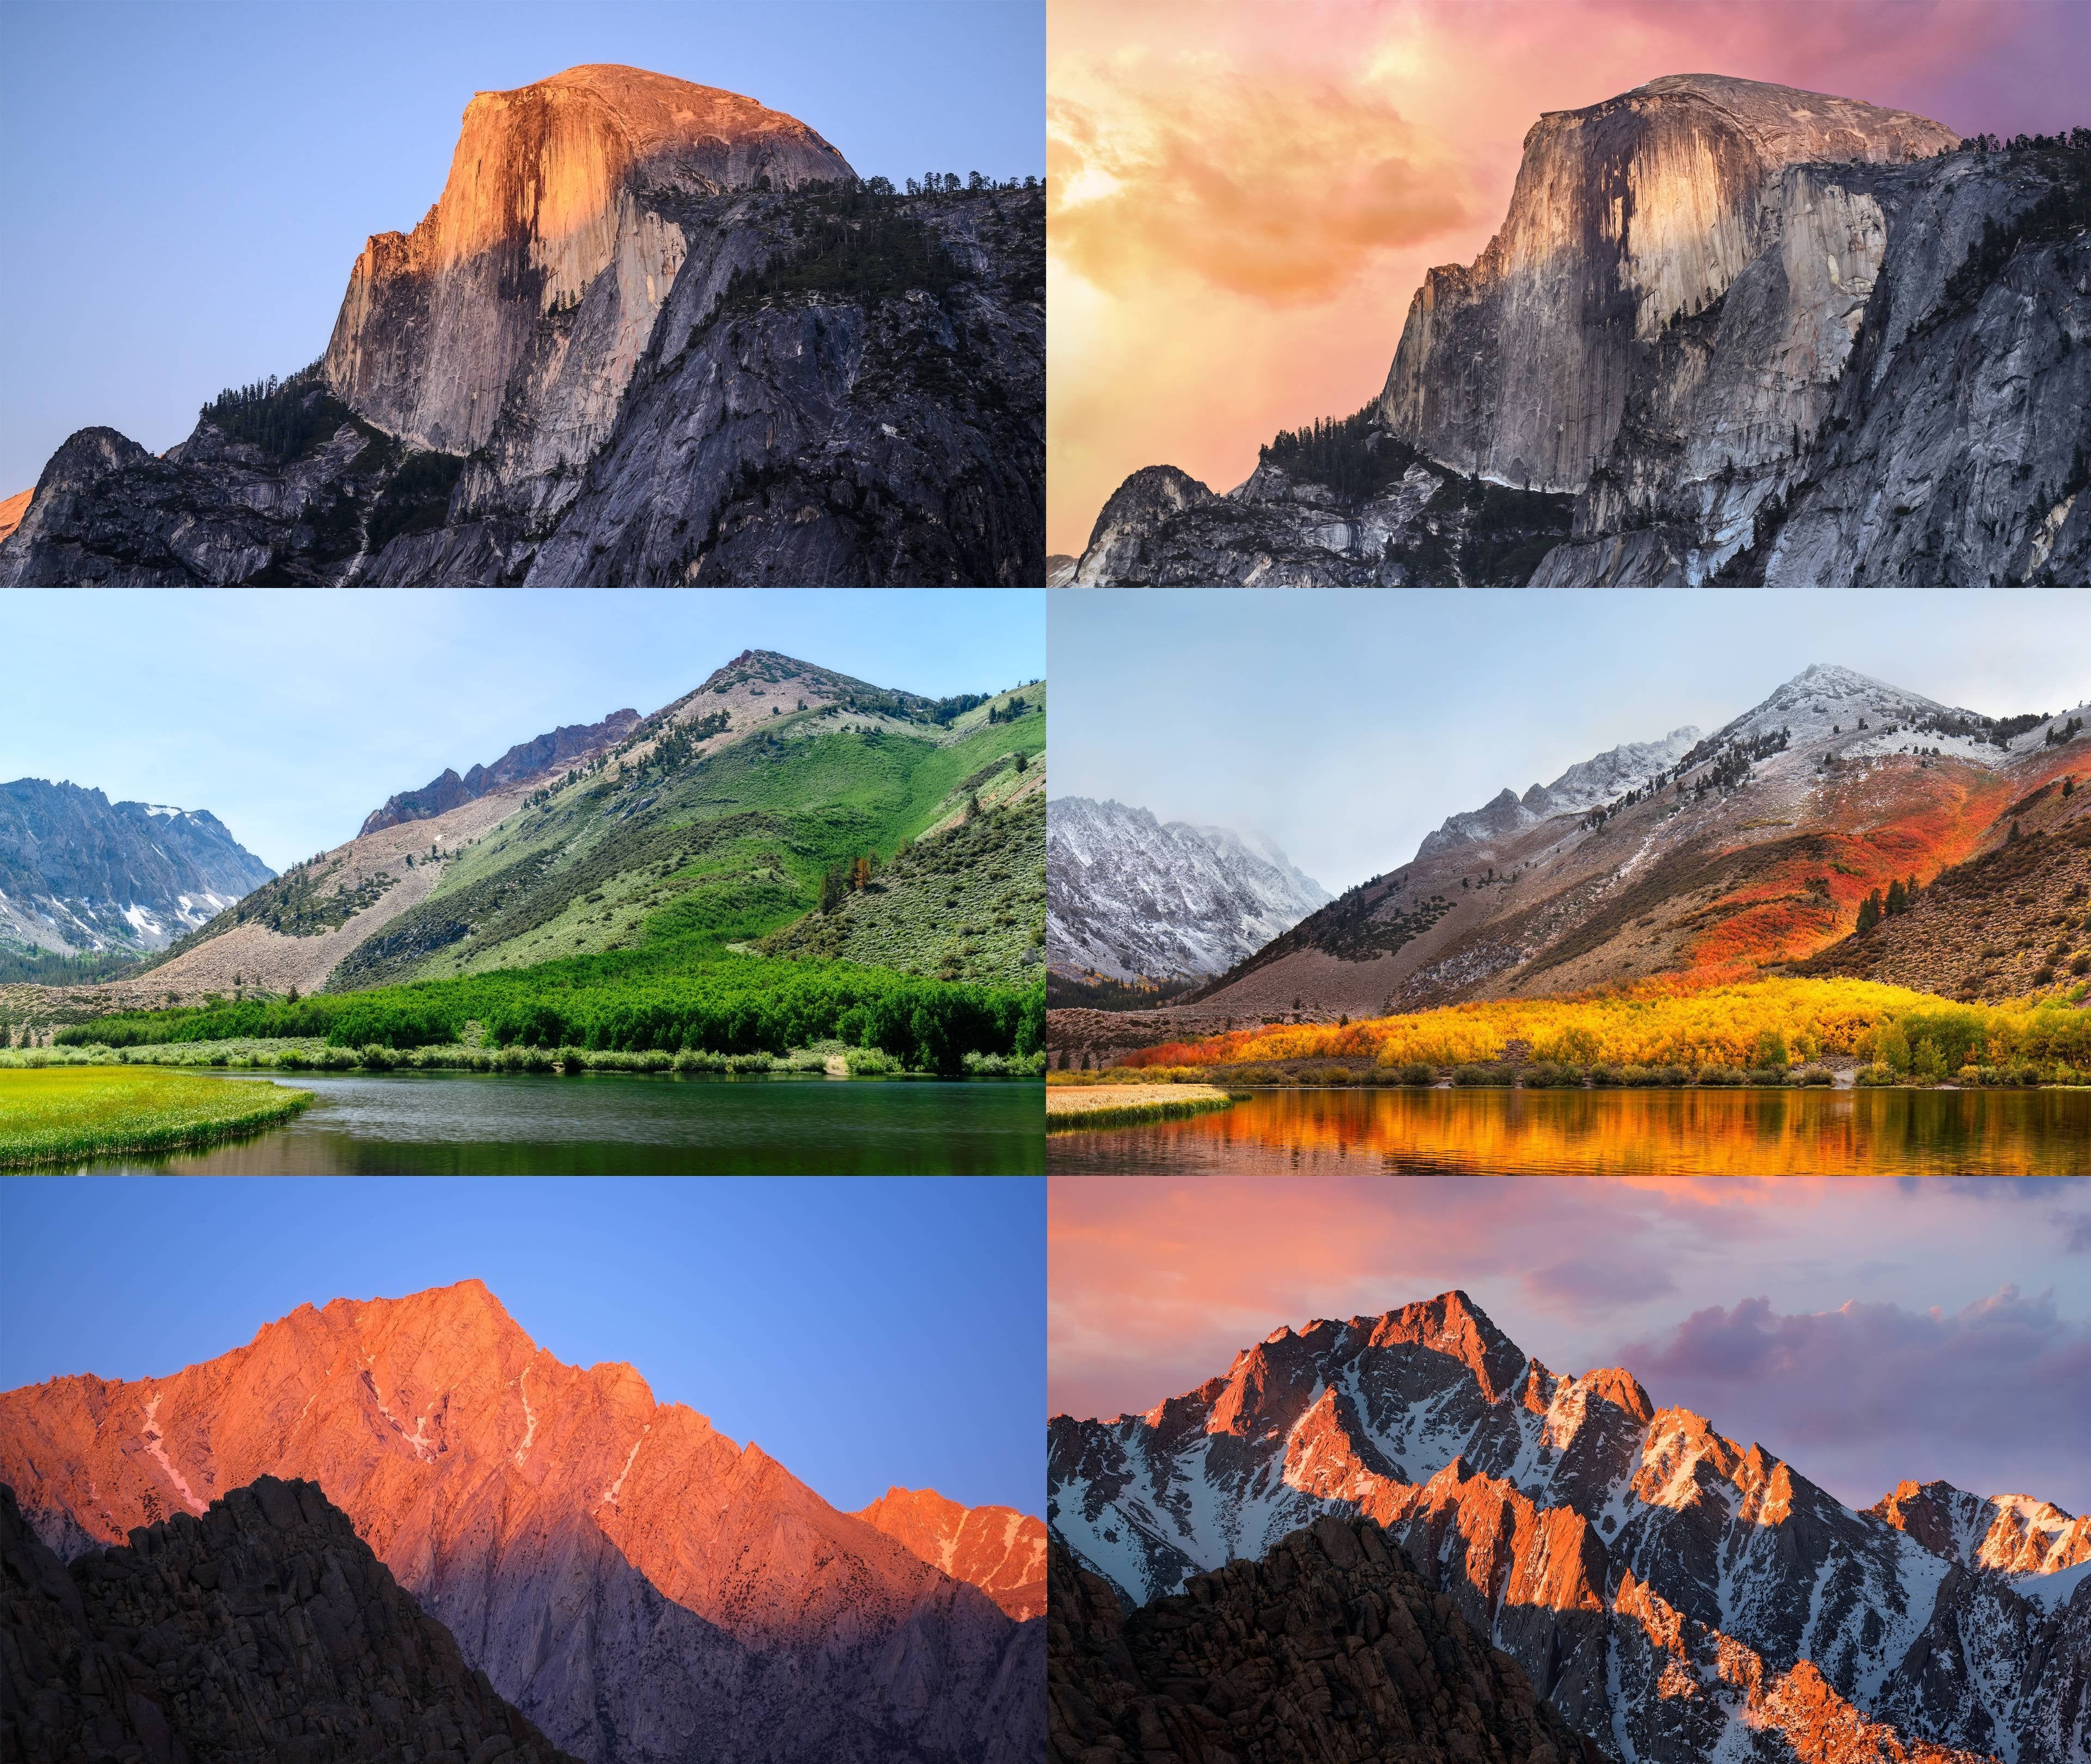 My friends and I recreated every default Apple wallpaper (MacOS Mojave, High Sierra, Yosemite, etc.) during a one week road trip through California